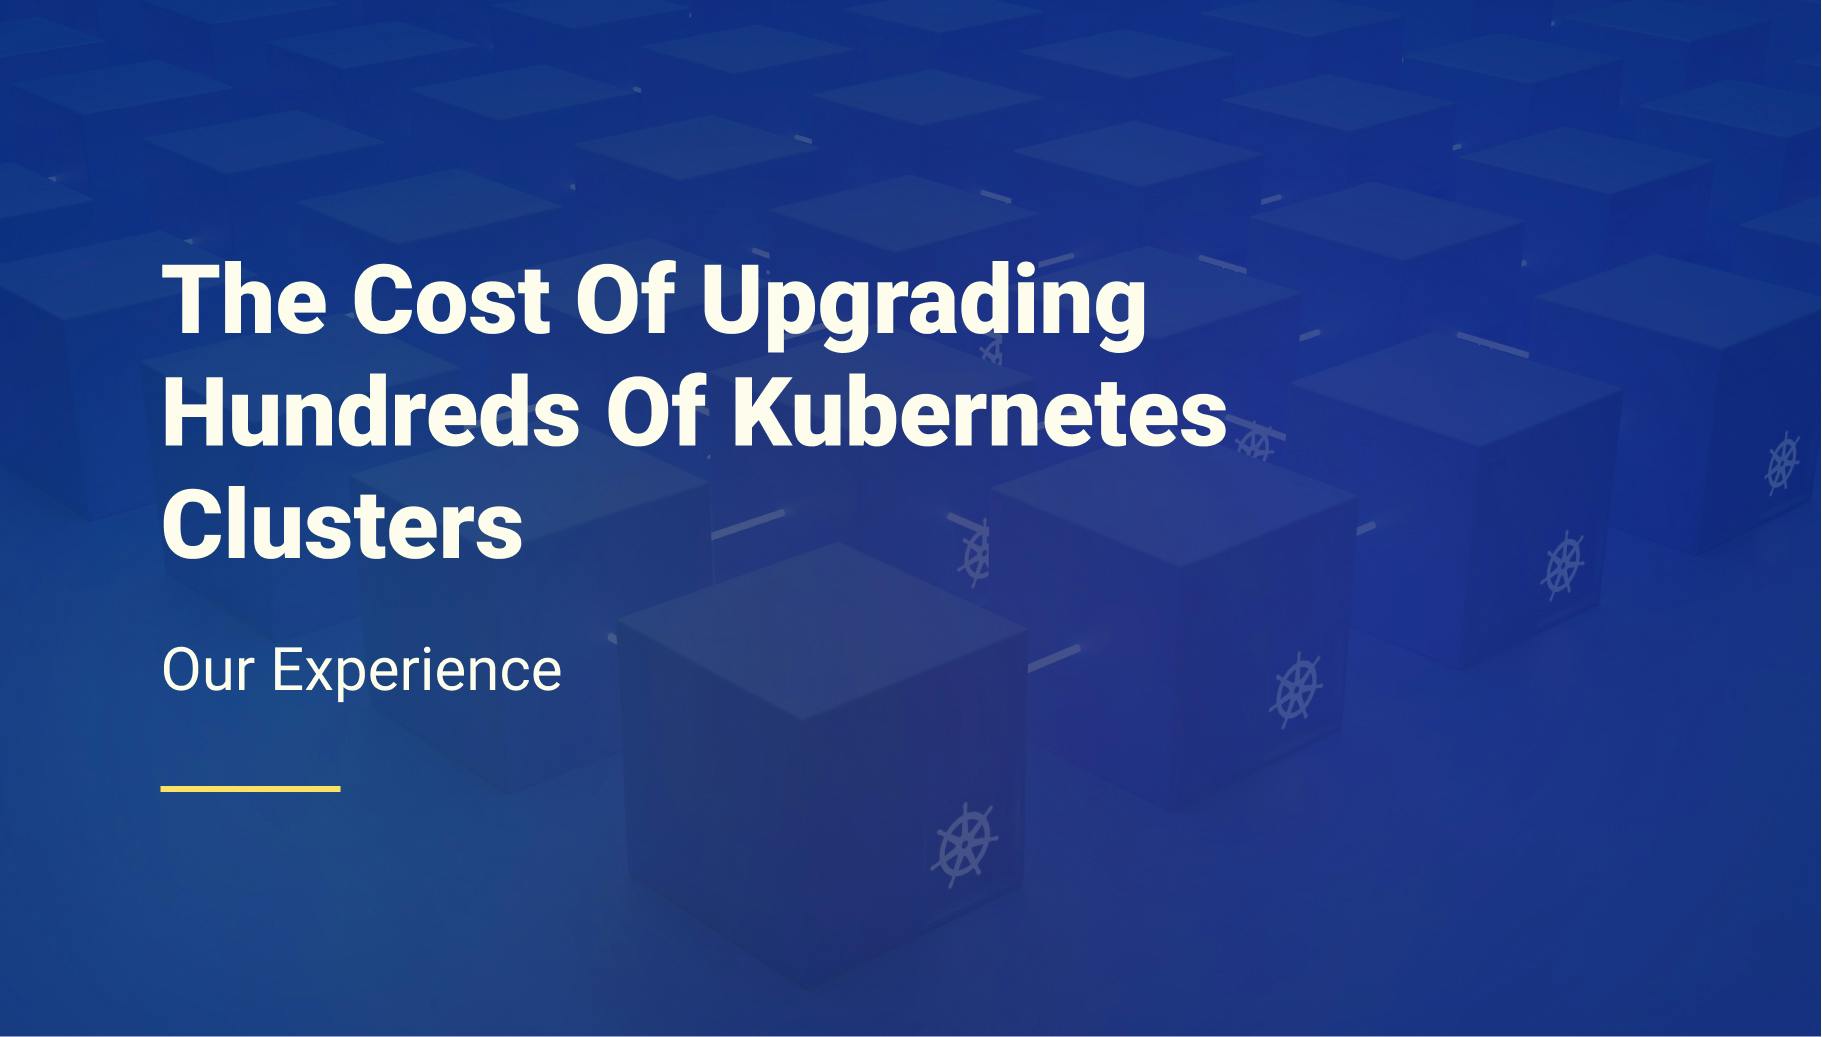 The Cost of Upgrading Hundreds of Kubernetes Clusters - Qovery